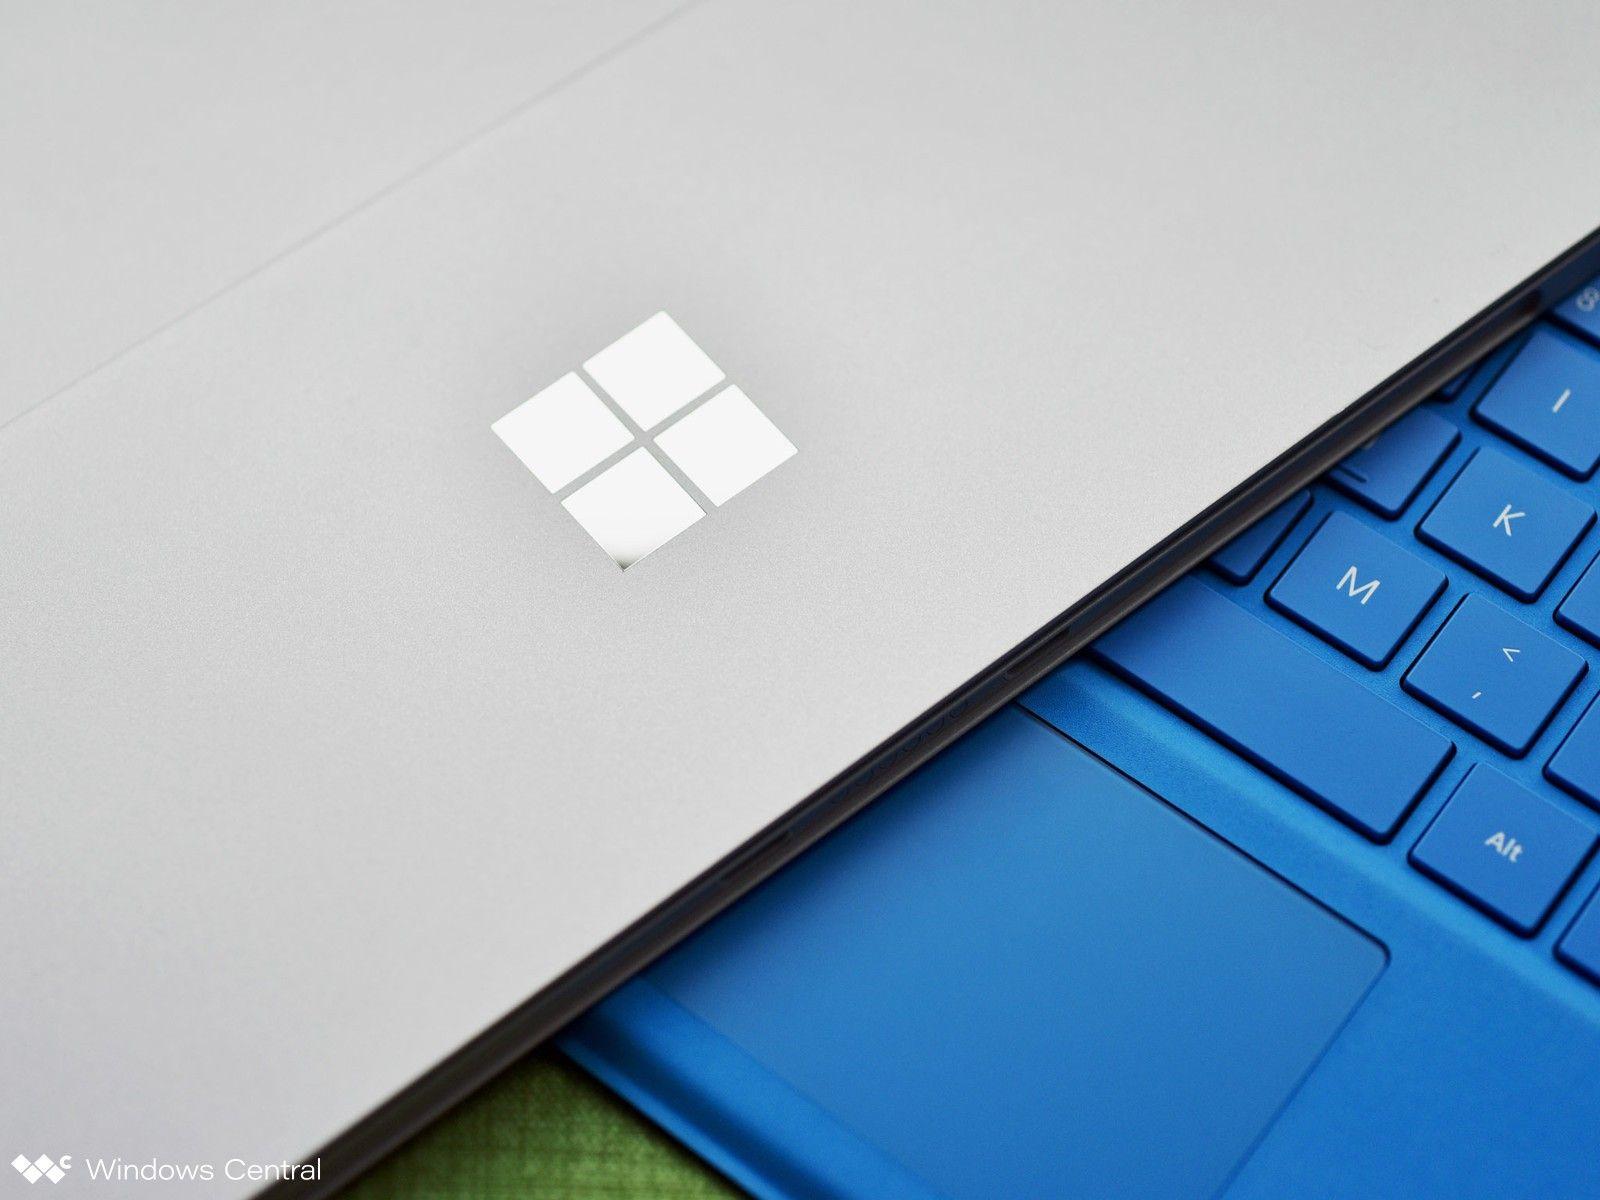 Windows Surface Logo - What we hope to see in a new 10-inch Surface from Microsoft ...